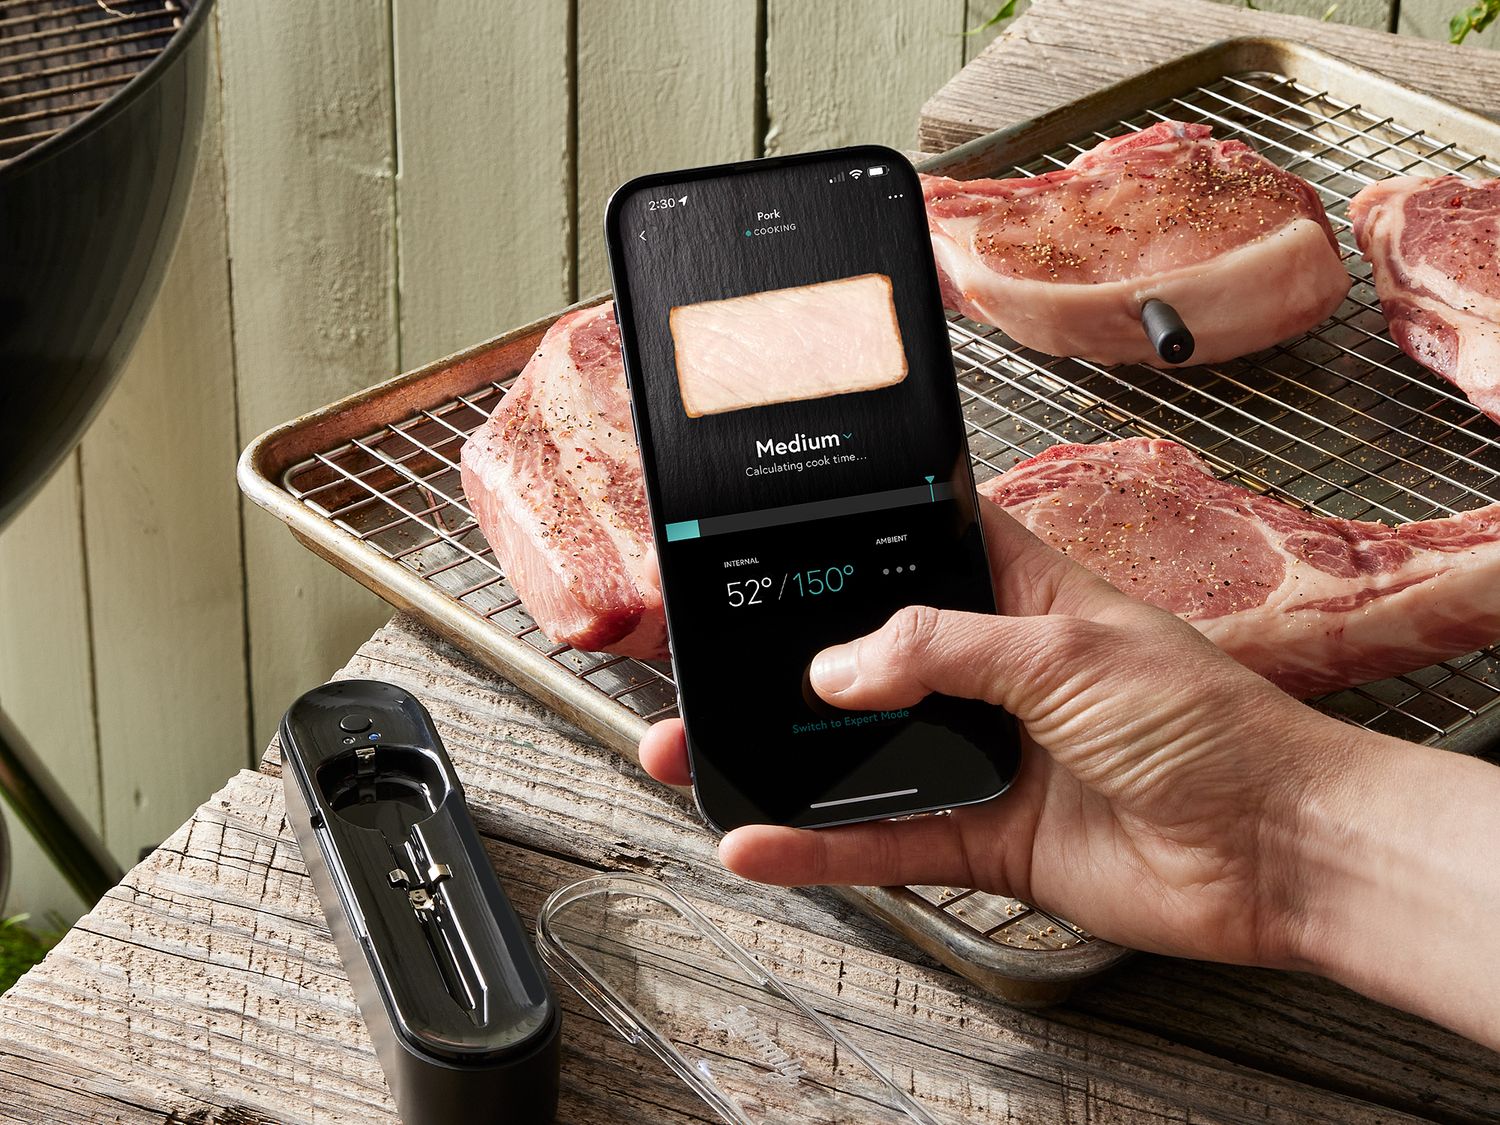 iDevices Kitchen Thermometer review: This meat thermometer is well